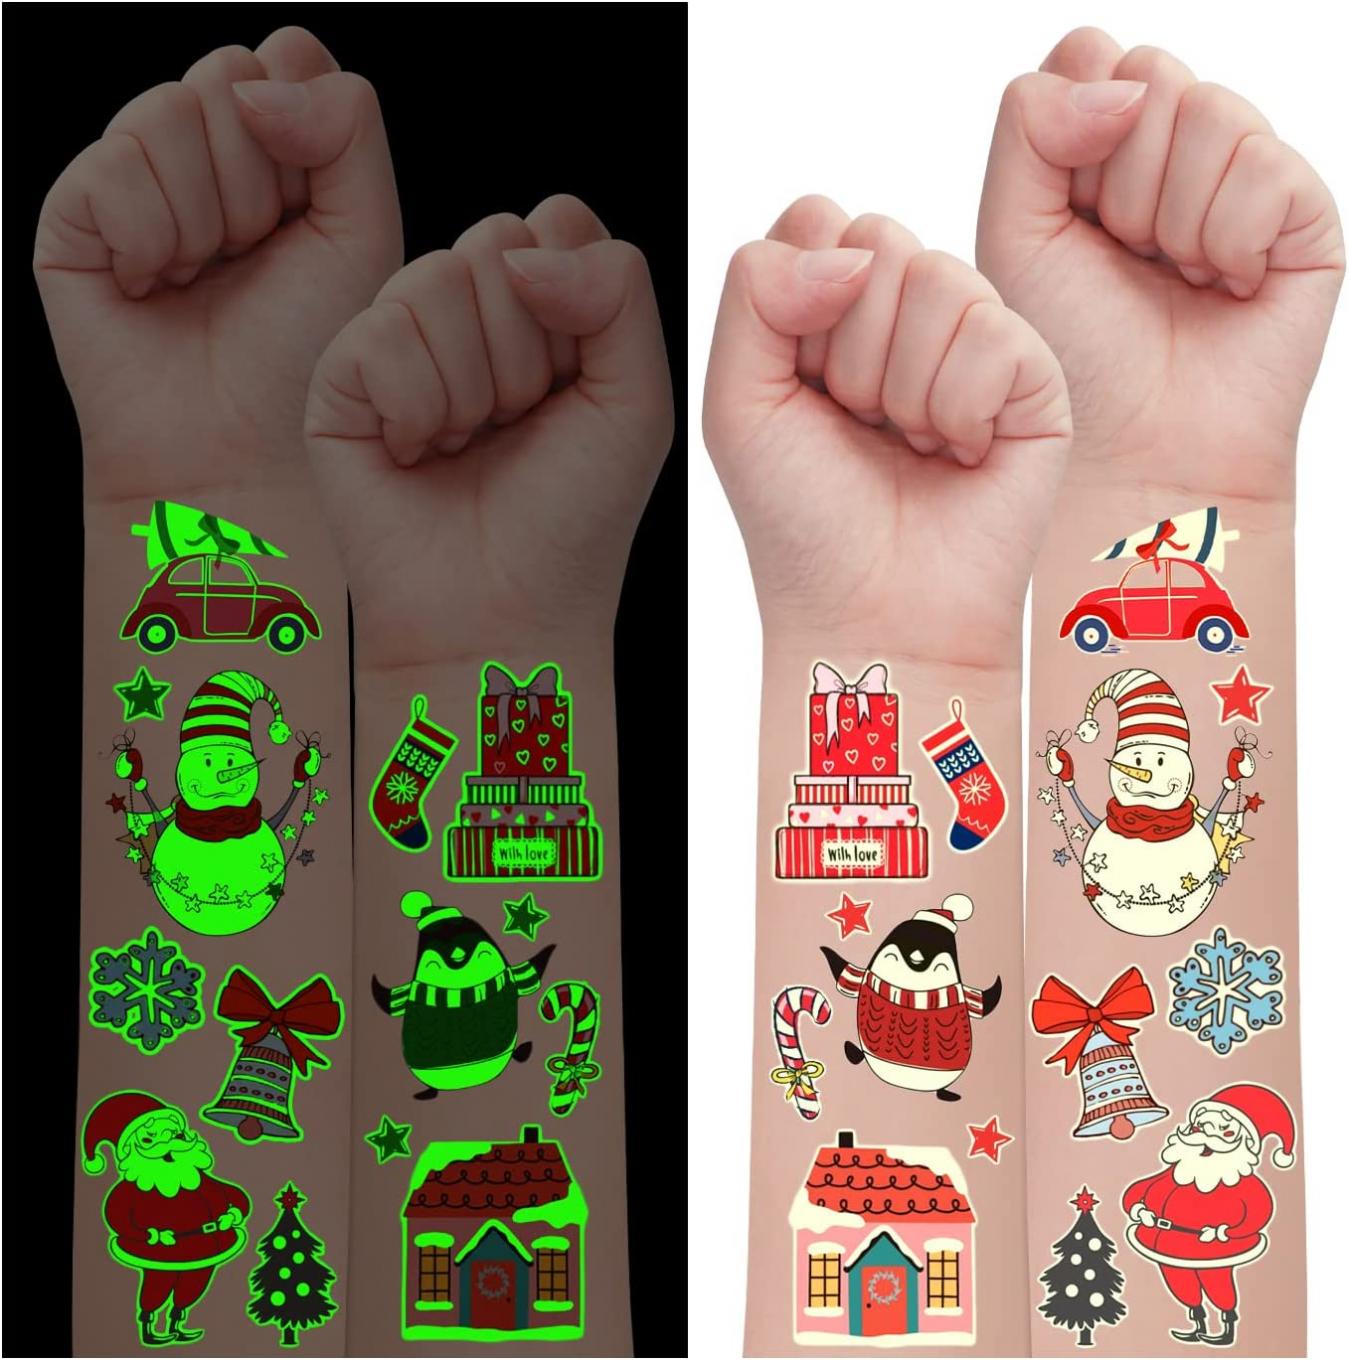 Partywind 235 Styles Glow Christmas Tattoos for Kids Stocking Stuffers, Luminous Christmas Gifts for Party Decorations Supplies Favors, Holiday Party Games Toys, Santa Snowflake Decor (24 Sheets)